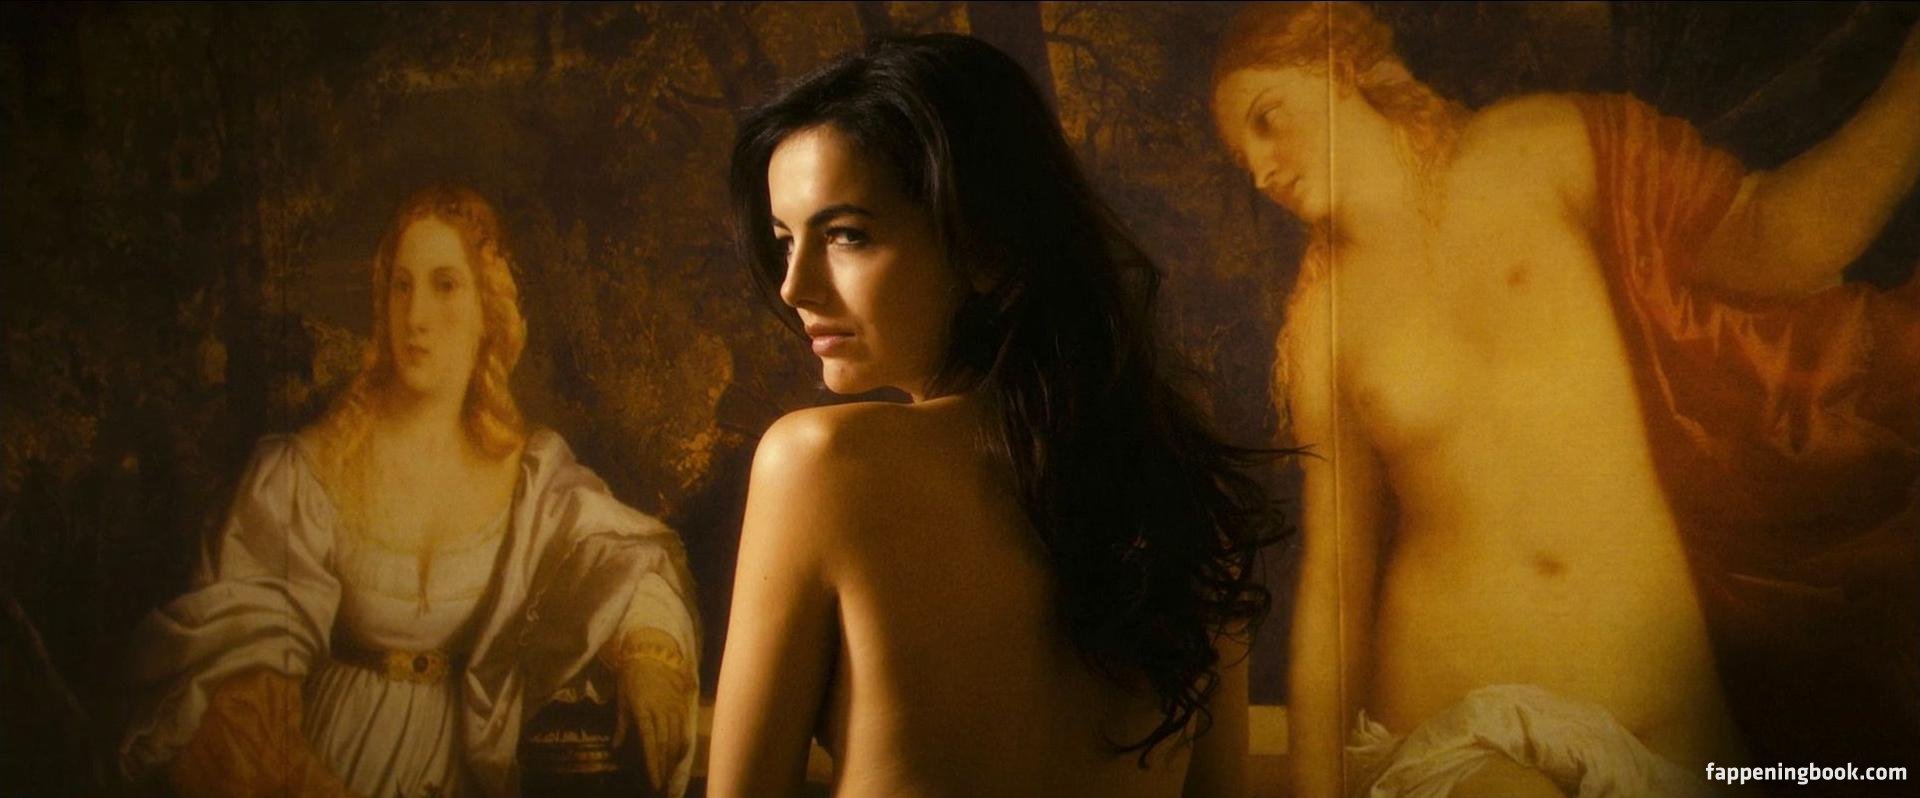 Camilla Belle Nude, The Fappening - Photo #93904 - FappeningBook.